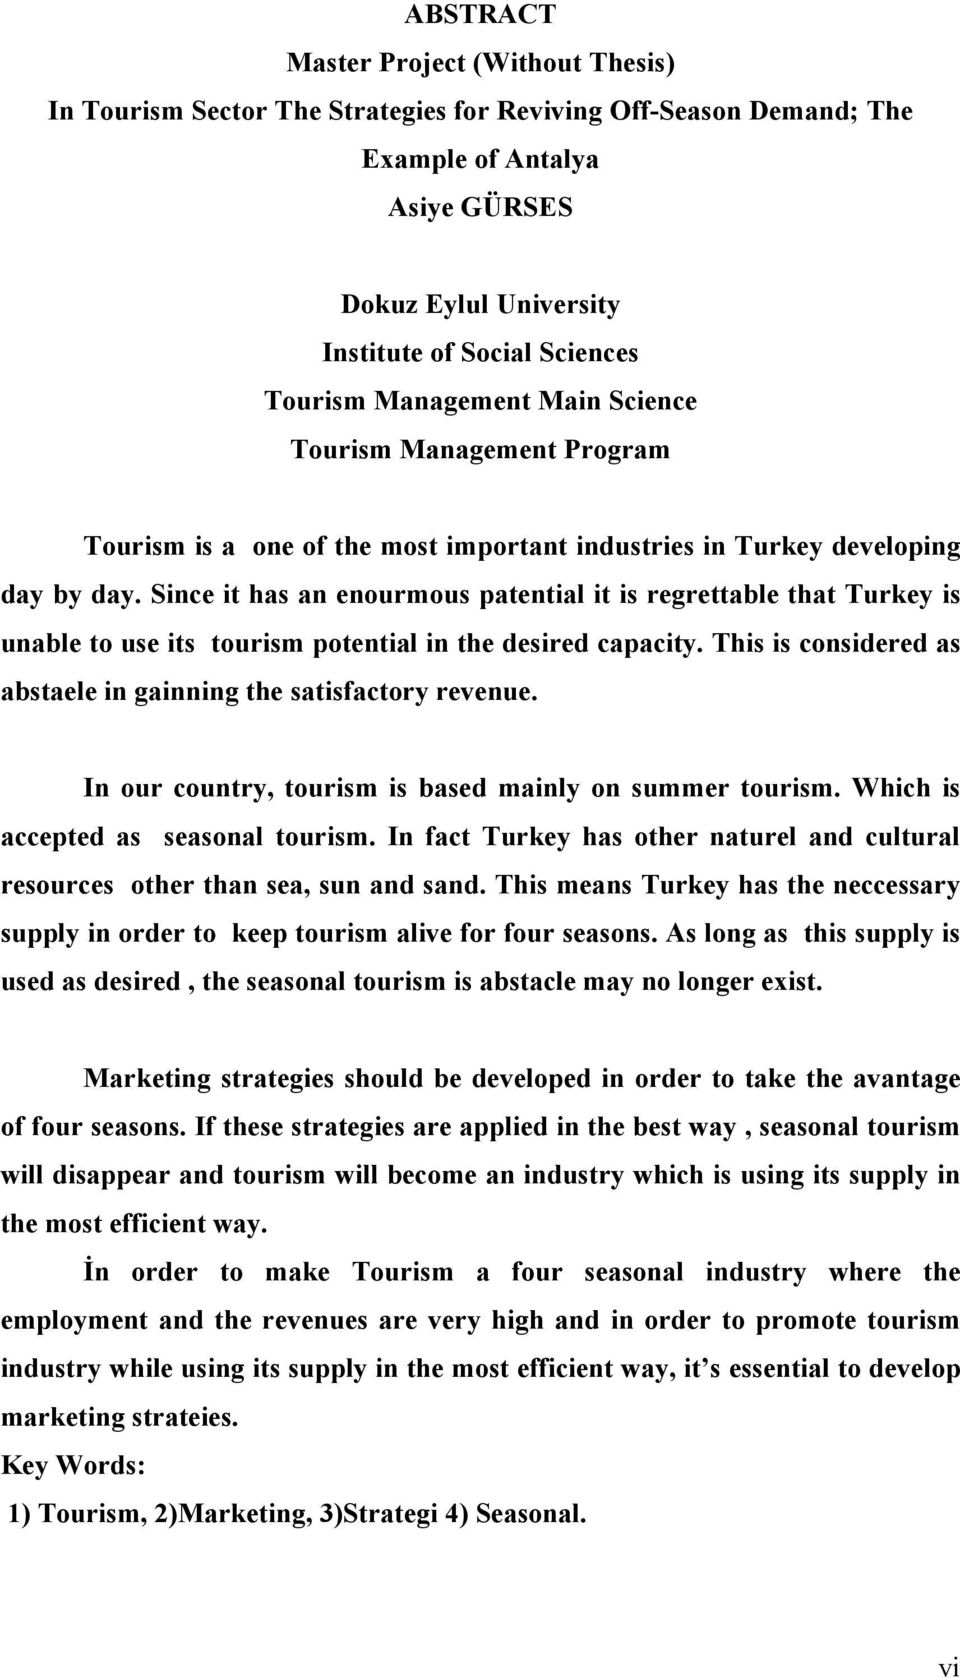 Since it has an enourmous patential it is regrettable that Turkey is unable to use its tourism potential in the desired capacity. This is considered as abstaele in gainning the satisfactory revenue.